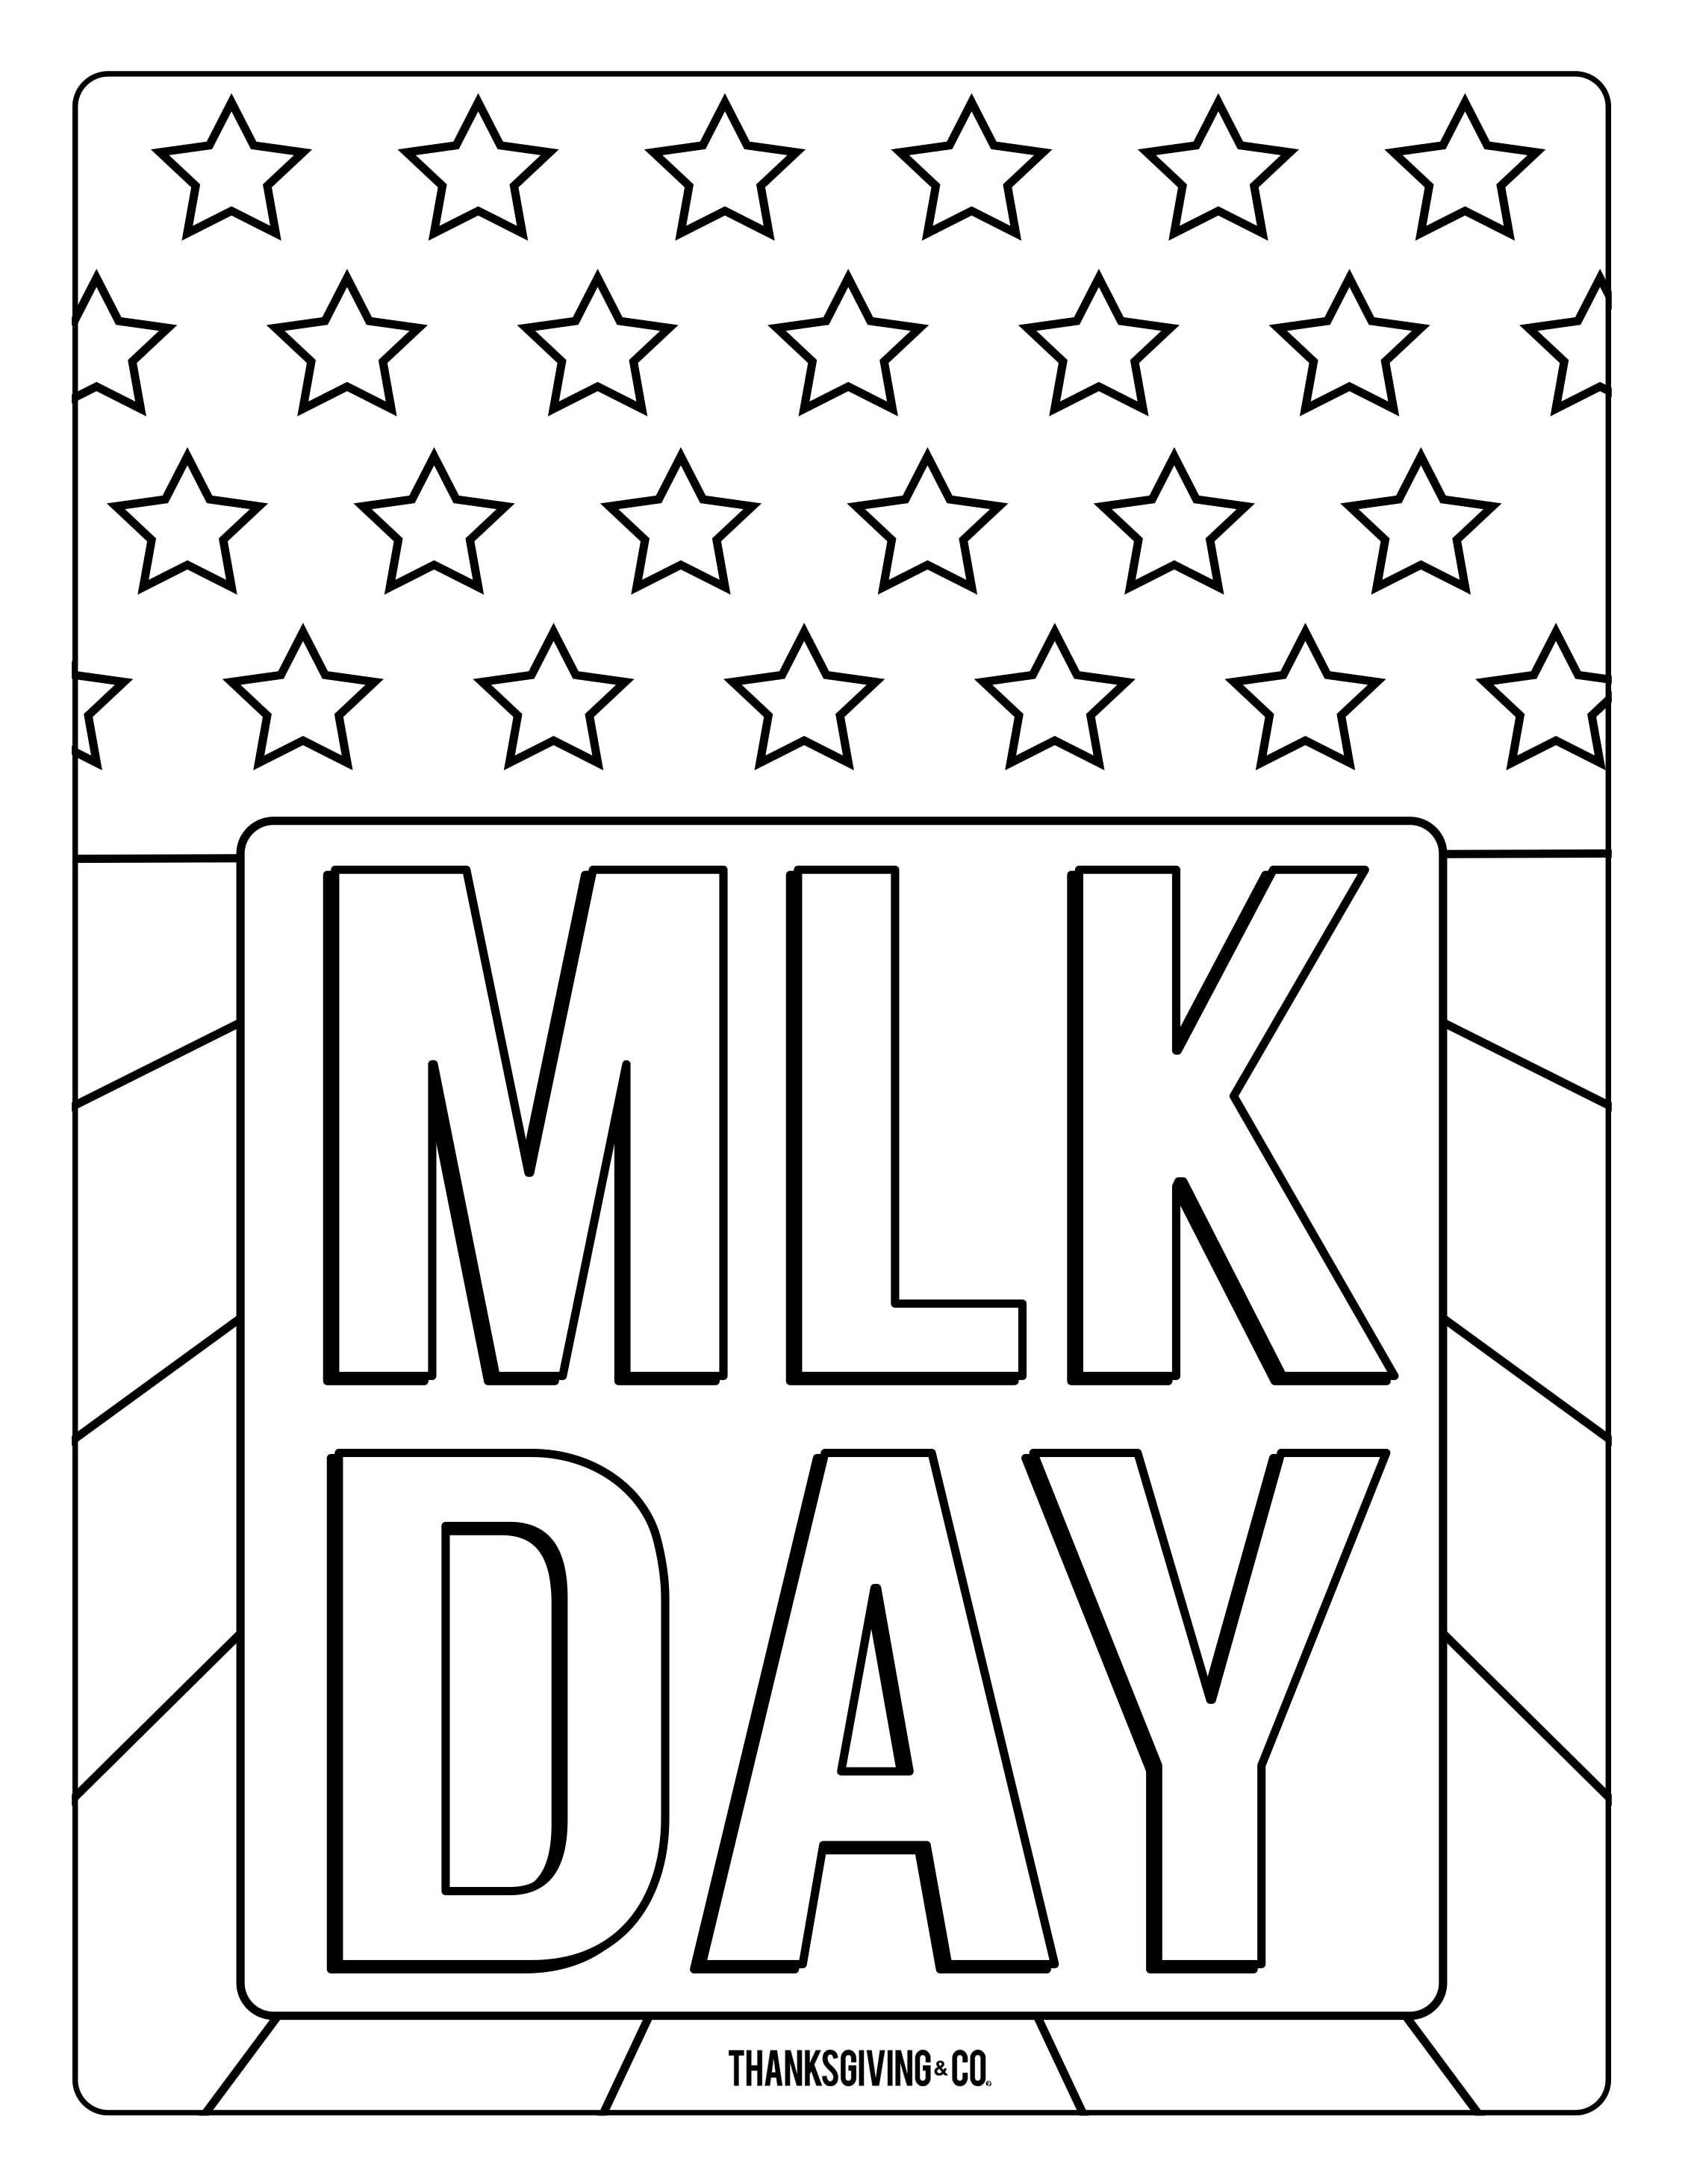 Share these fun Martin Luther King Jr. coloring pages with your